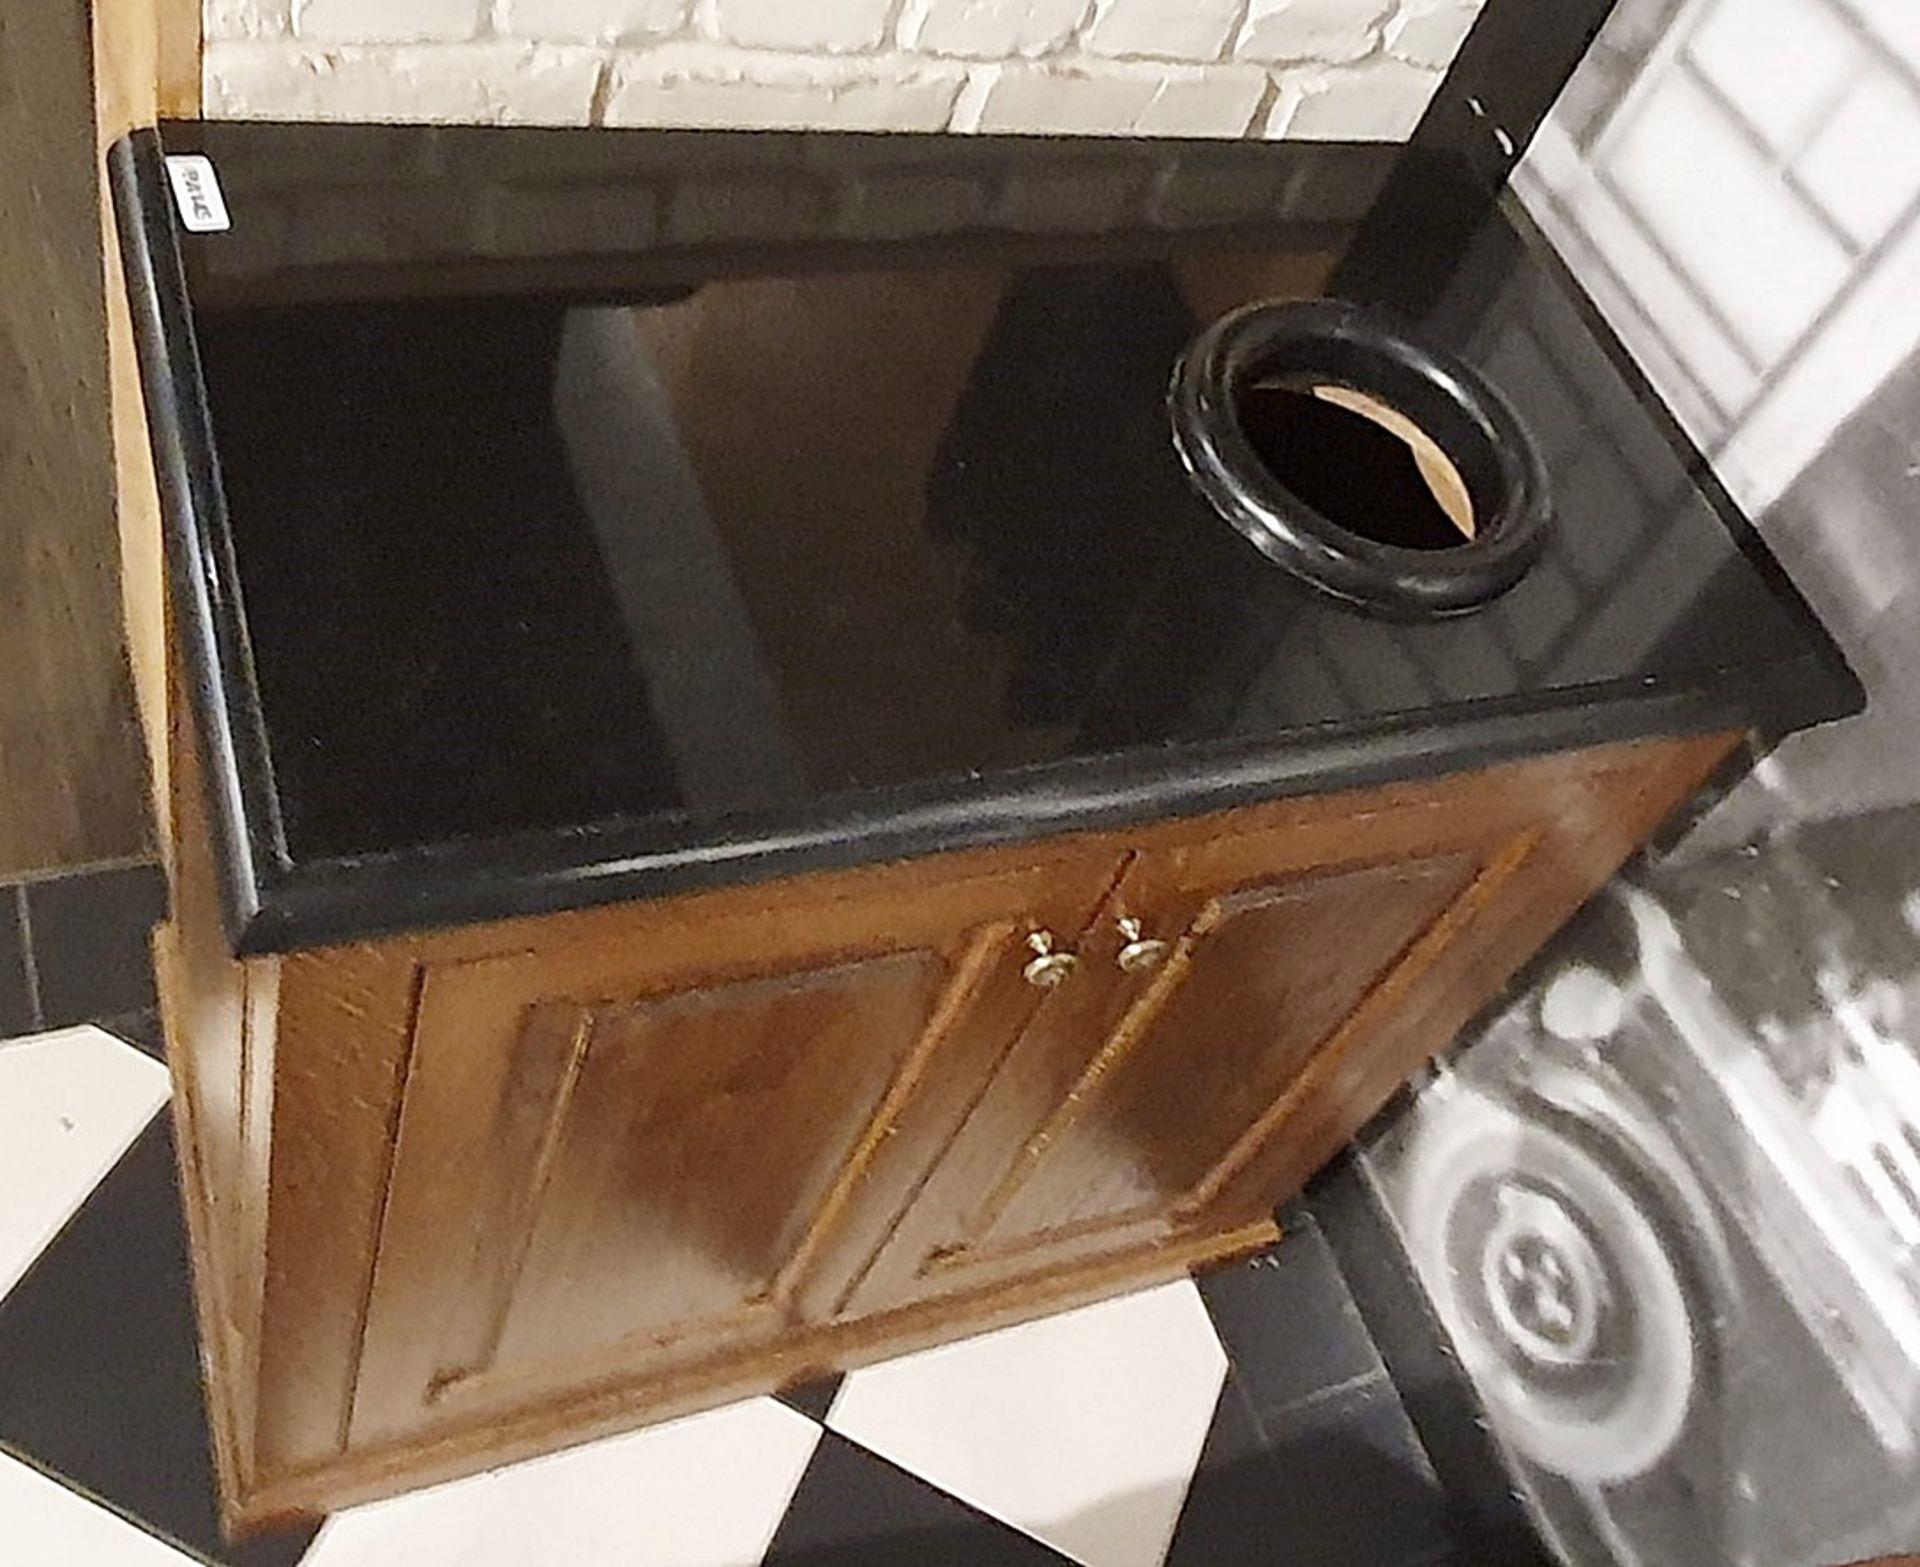 1 x Waitress / Waiter Service Cabinet in Walnut With Granite Surface and Cup Disposal Chute - H90 - Image 3 of 8